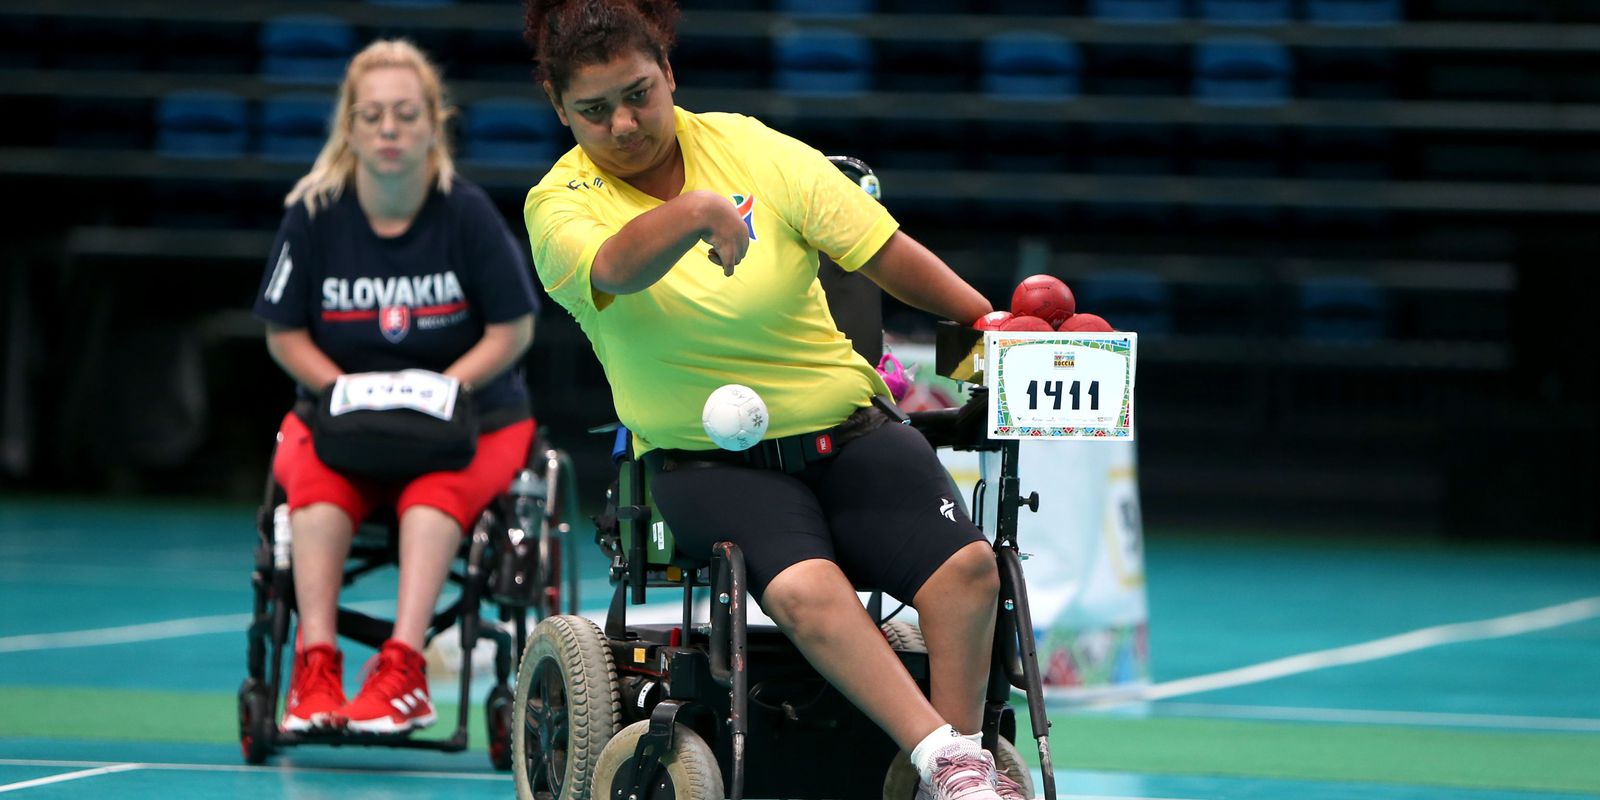 Brazilians advance to the knockout phase of the Boccia World Cup